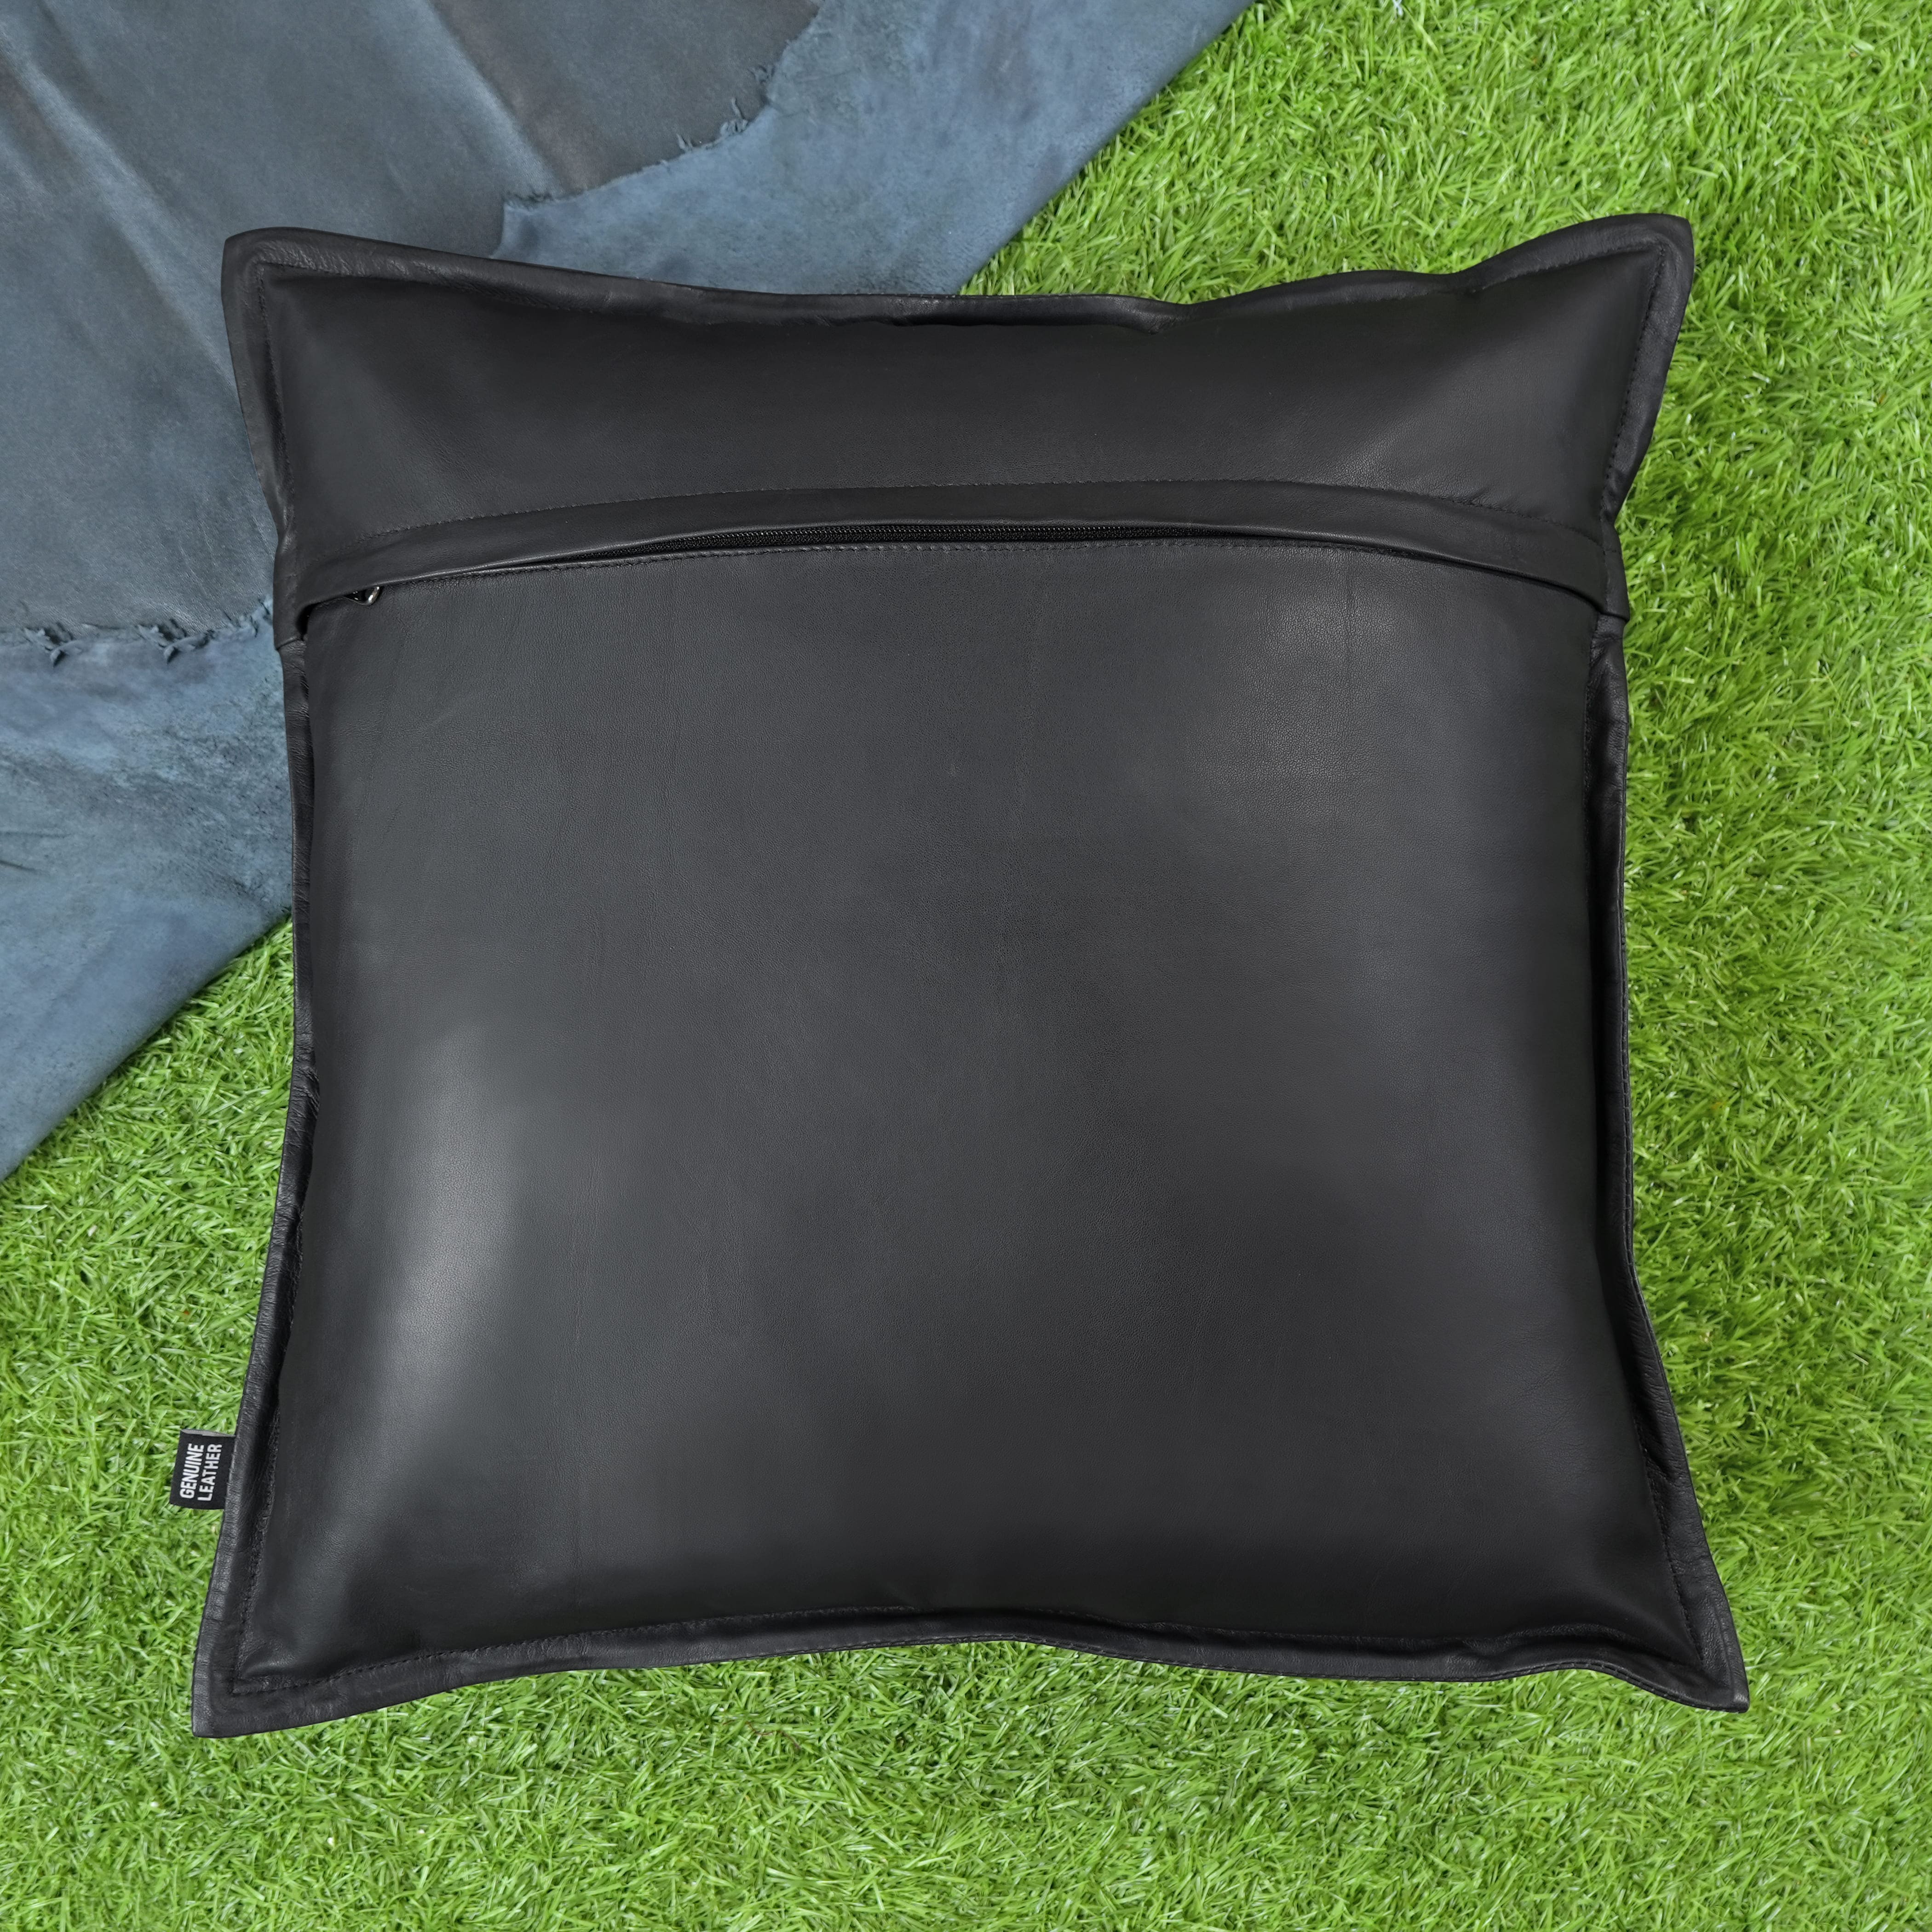 Genuine Black Leather Pillow Cover for Living Room & Bedroom (with out pillow insert)